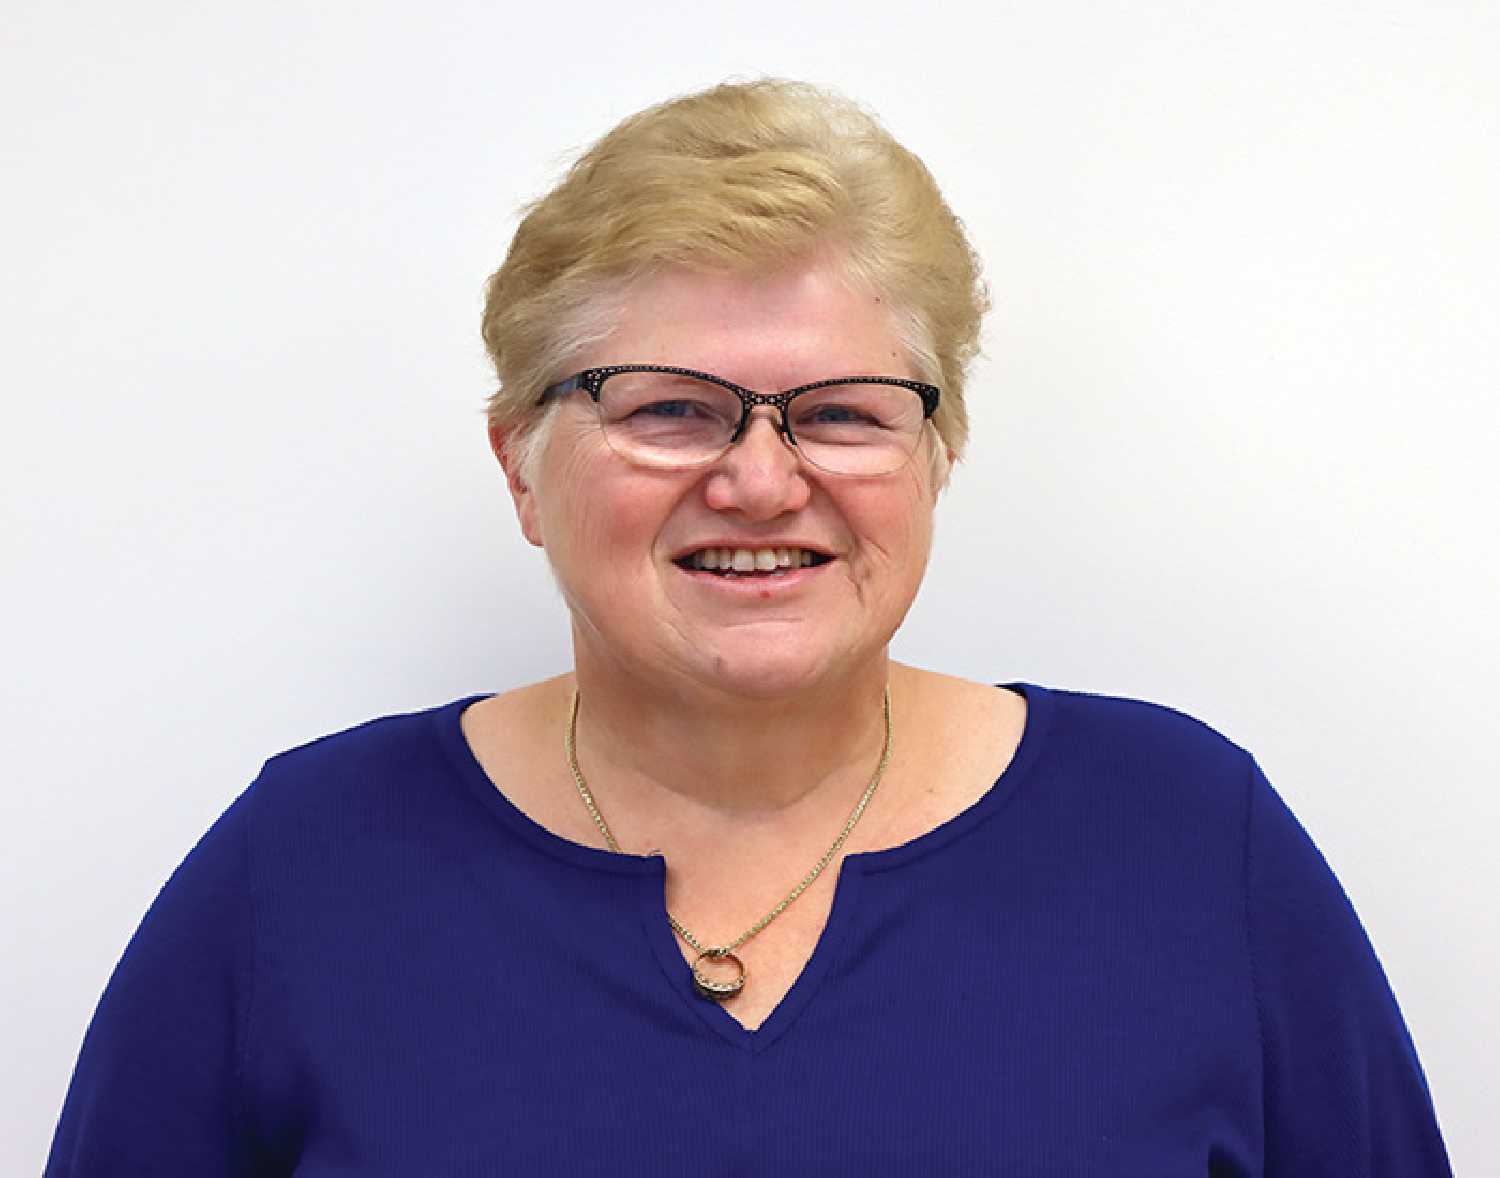 Retired teacher and MacLeod School  Principal Devona Putland was elected by acclamation for  the Subdivision 1 trustee position of the Southeast  Cornerstone School Division